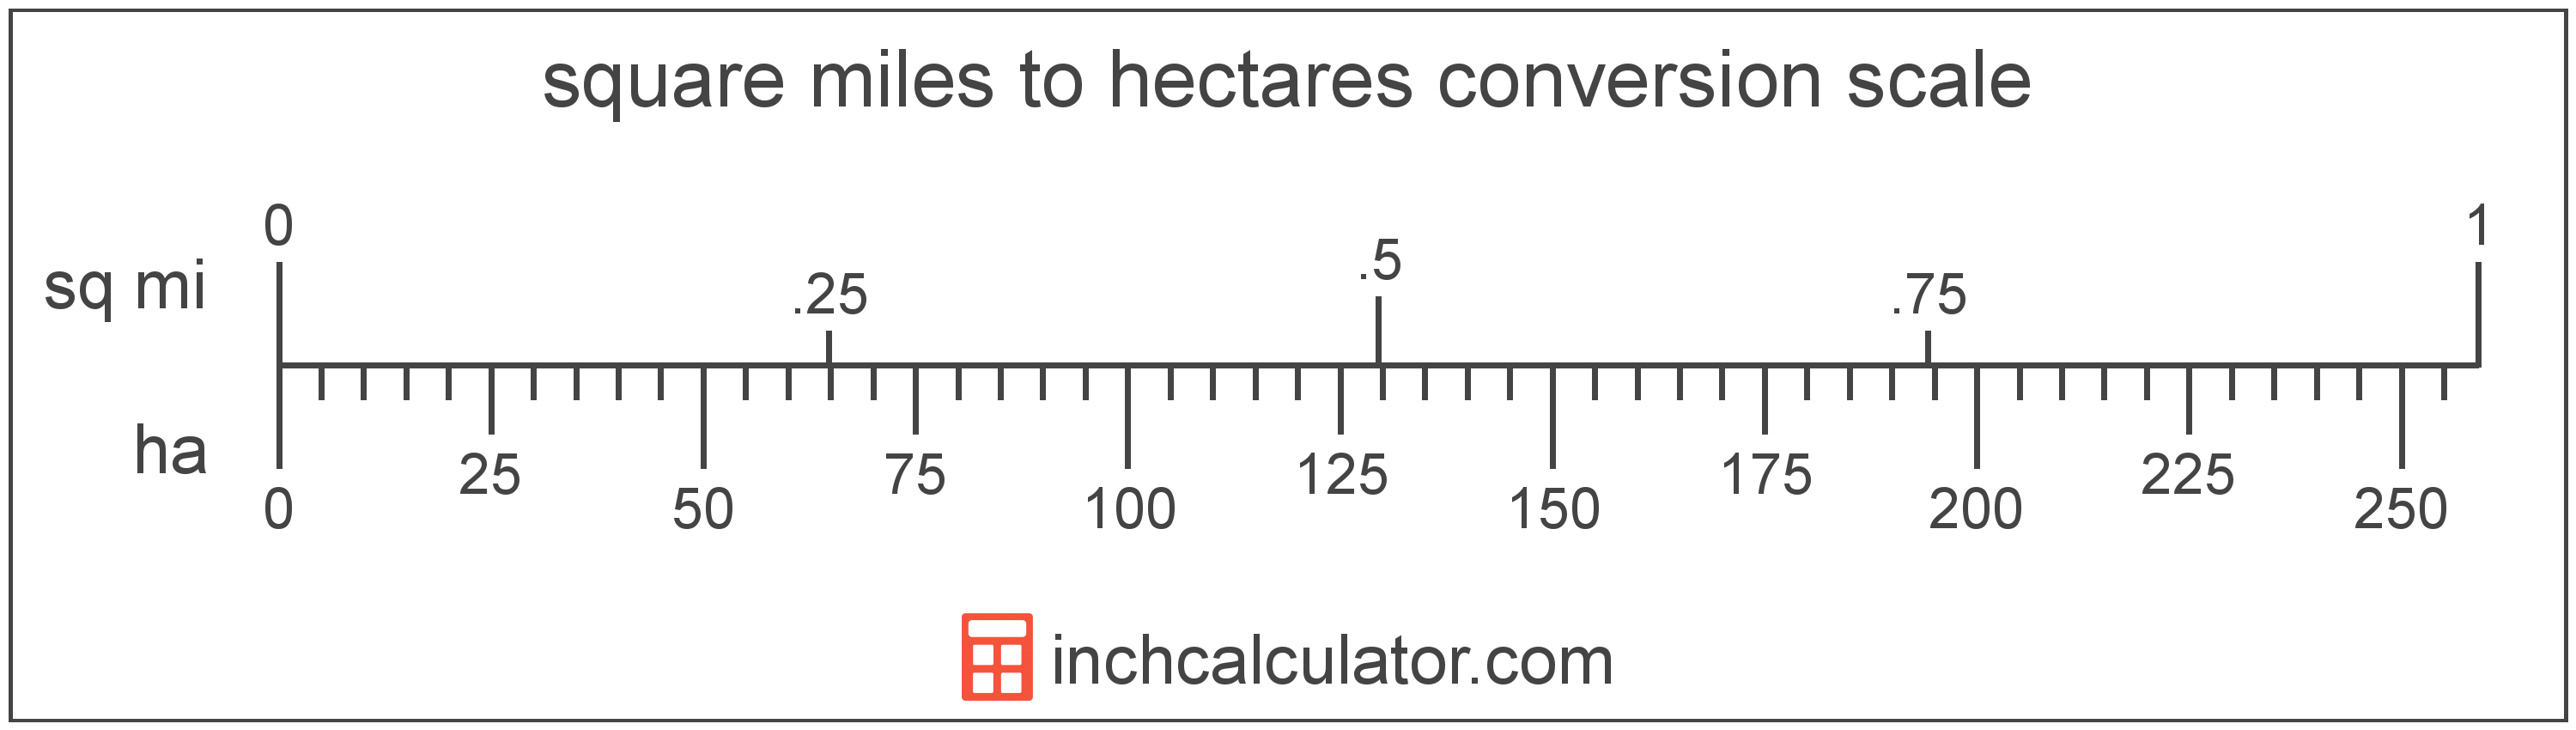 conversion scale showing hectares and equivalent square miles area values